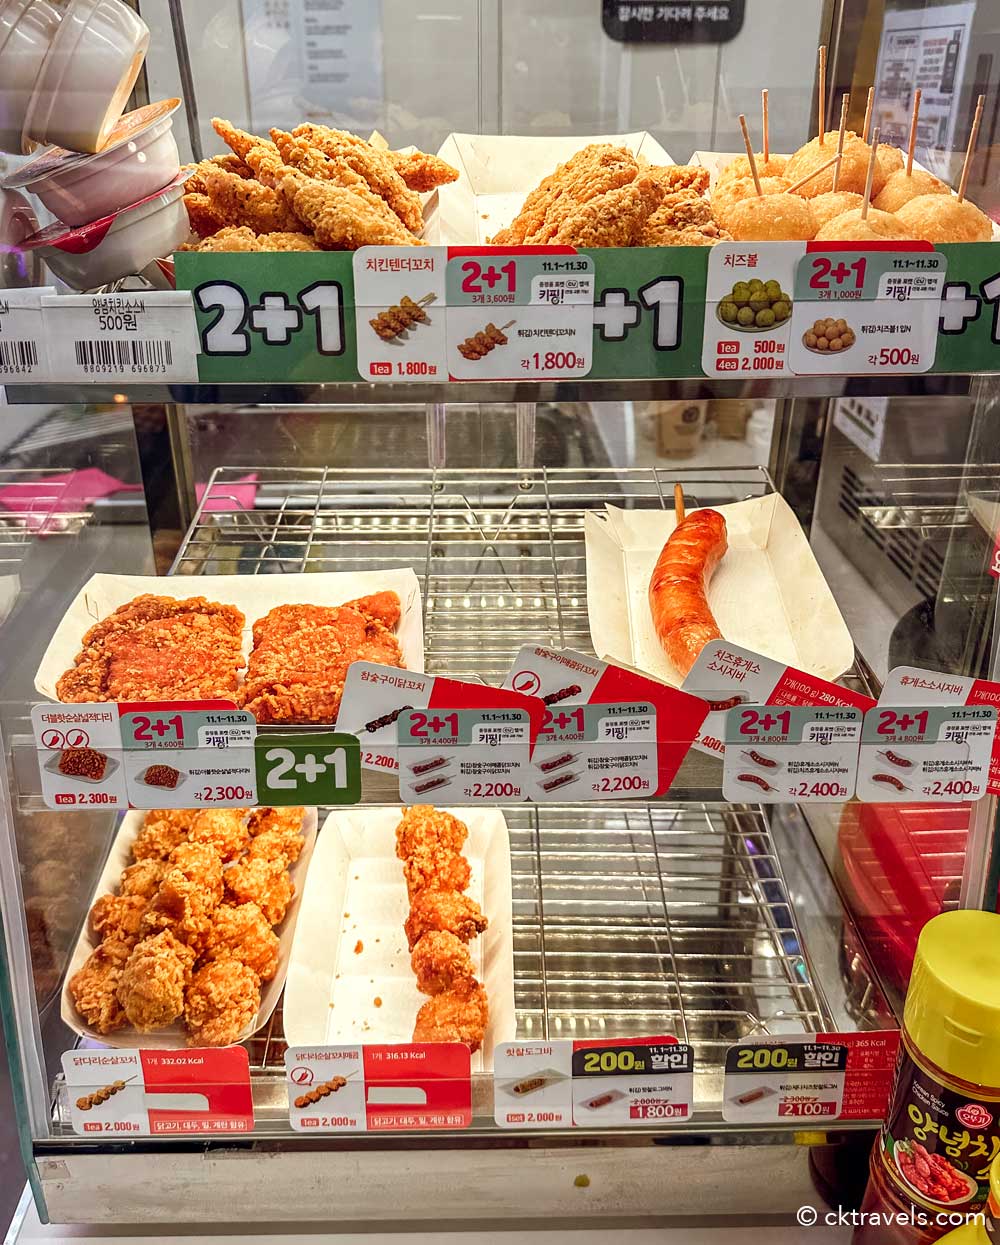 Korean fried chicken in a hot cabinet from CU convenience stores in South Korea